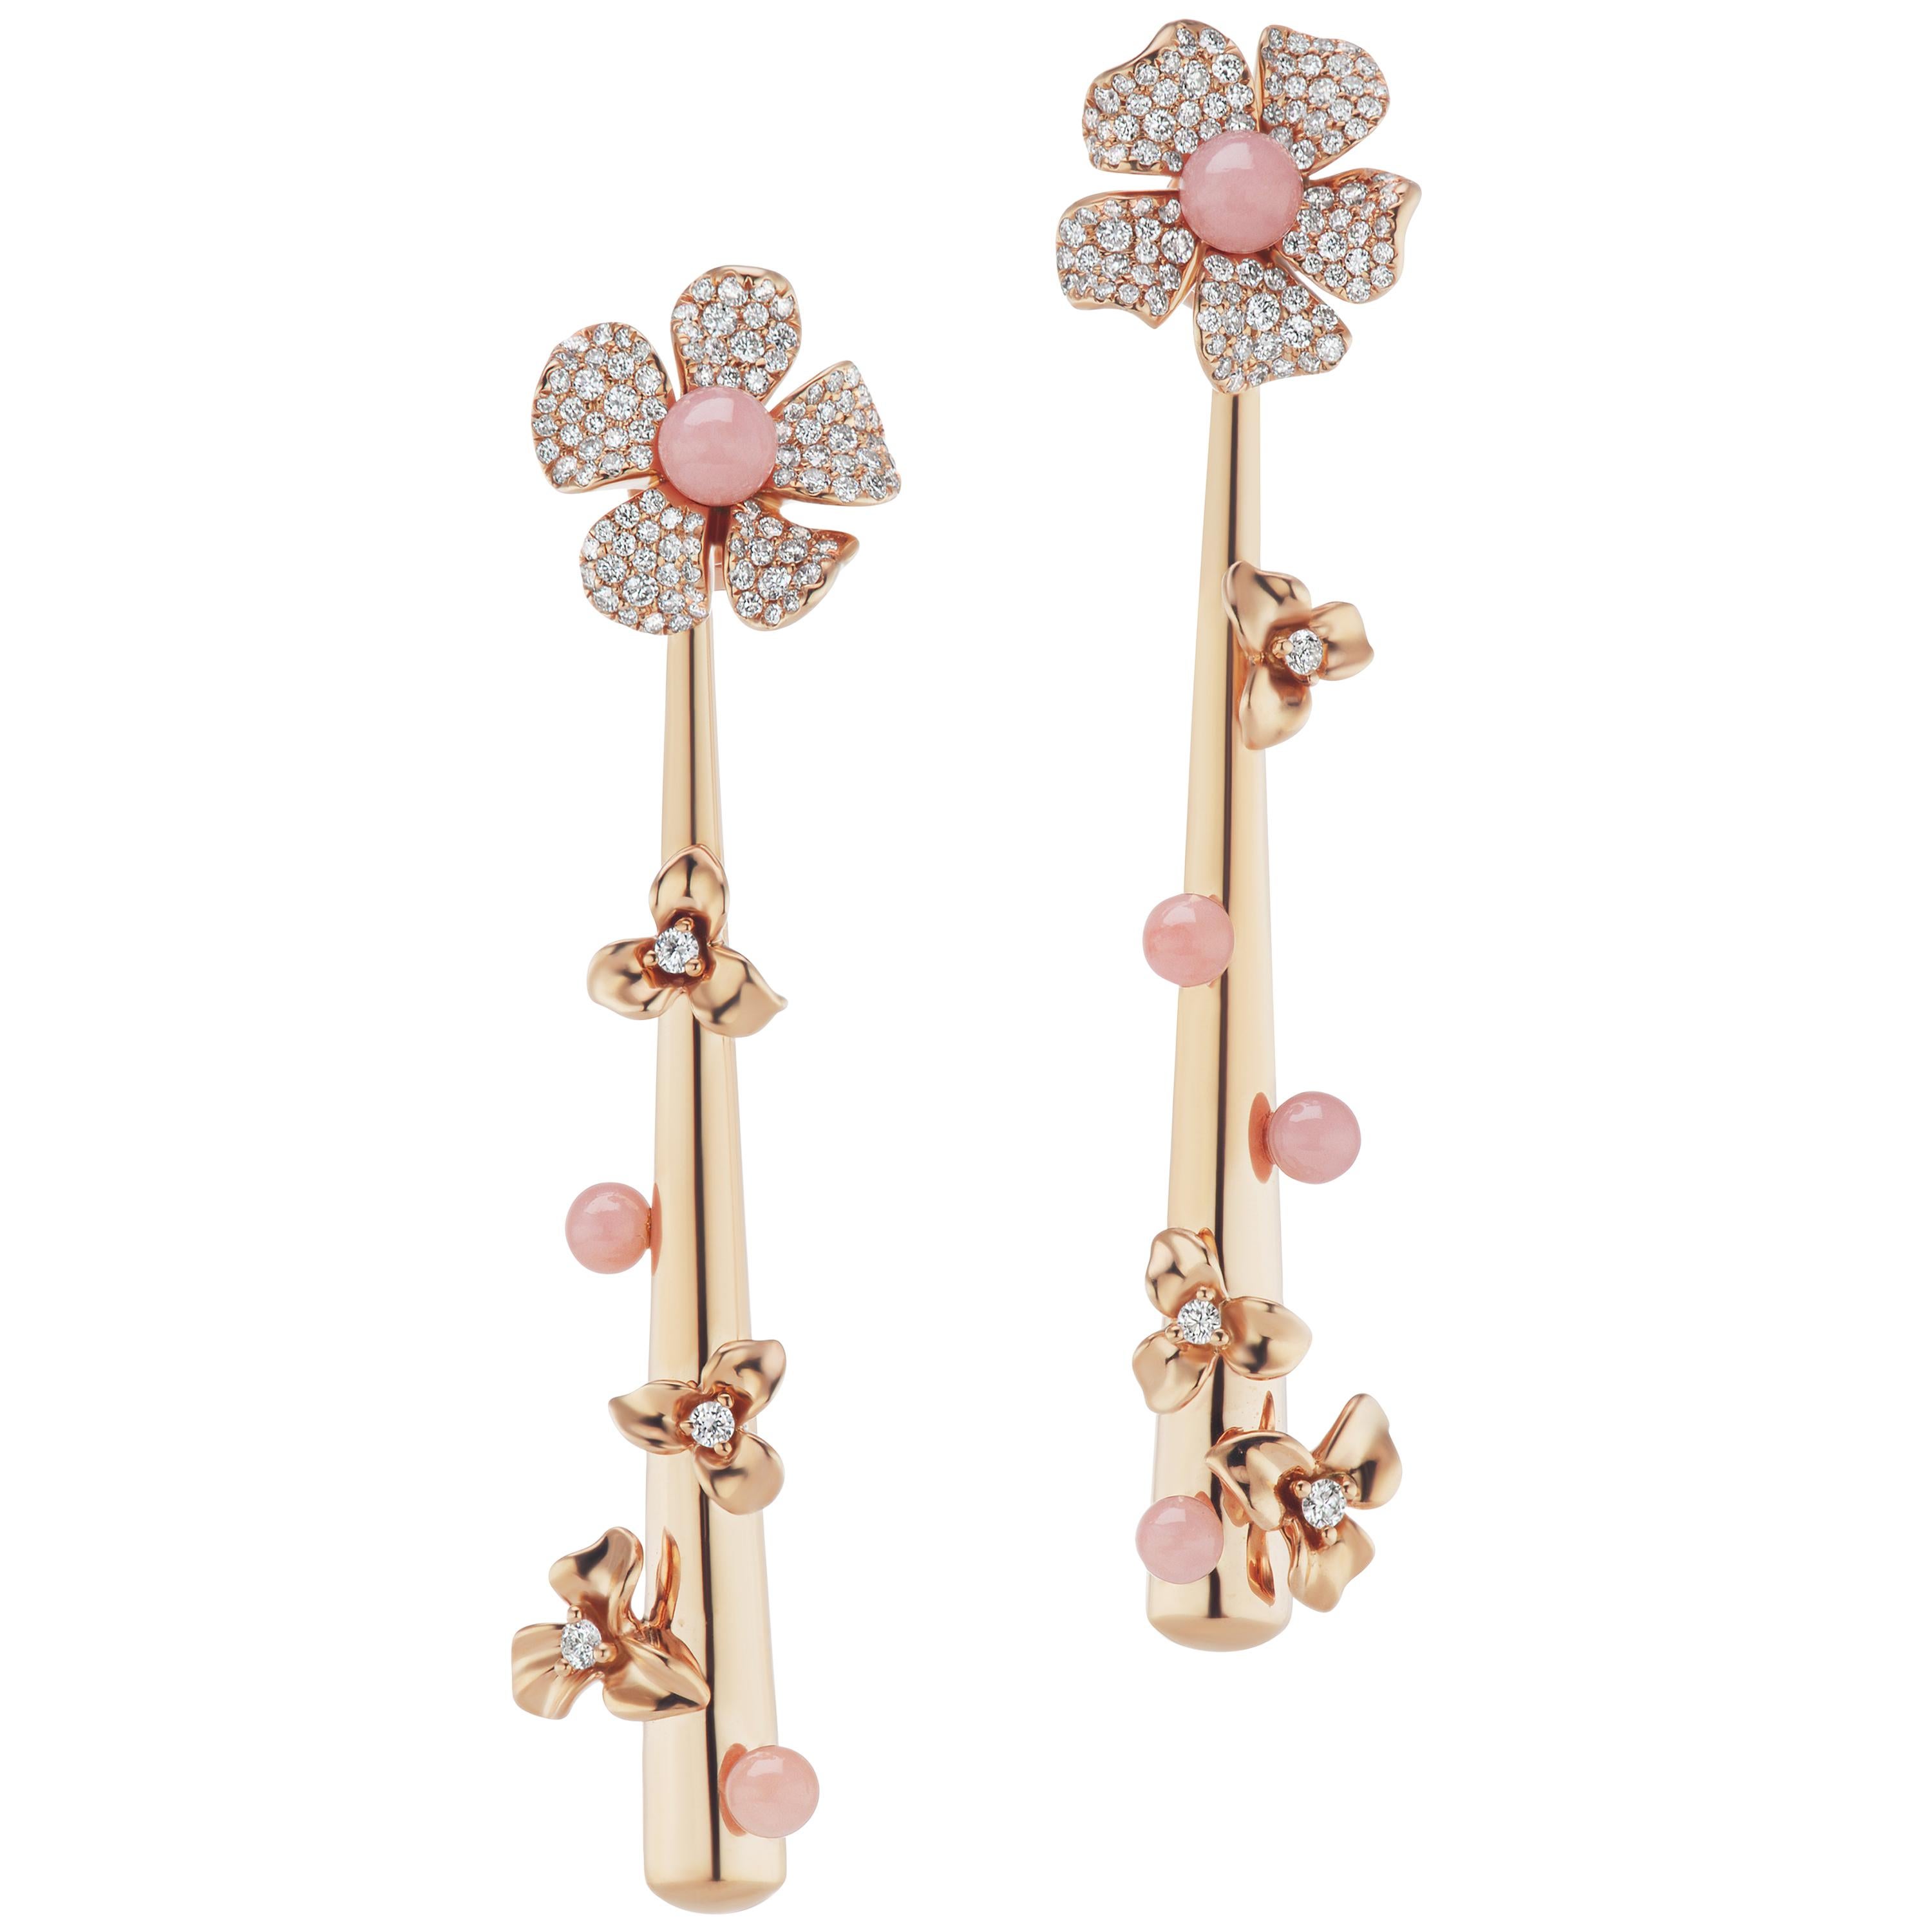 18 Karat Rose Gold Drop Earrings with Diamond and Pink Opal Accents For Sale